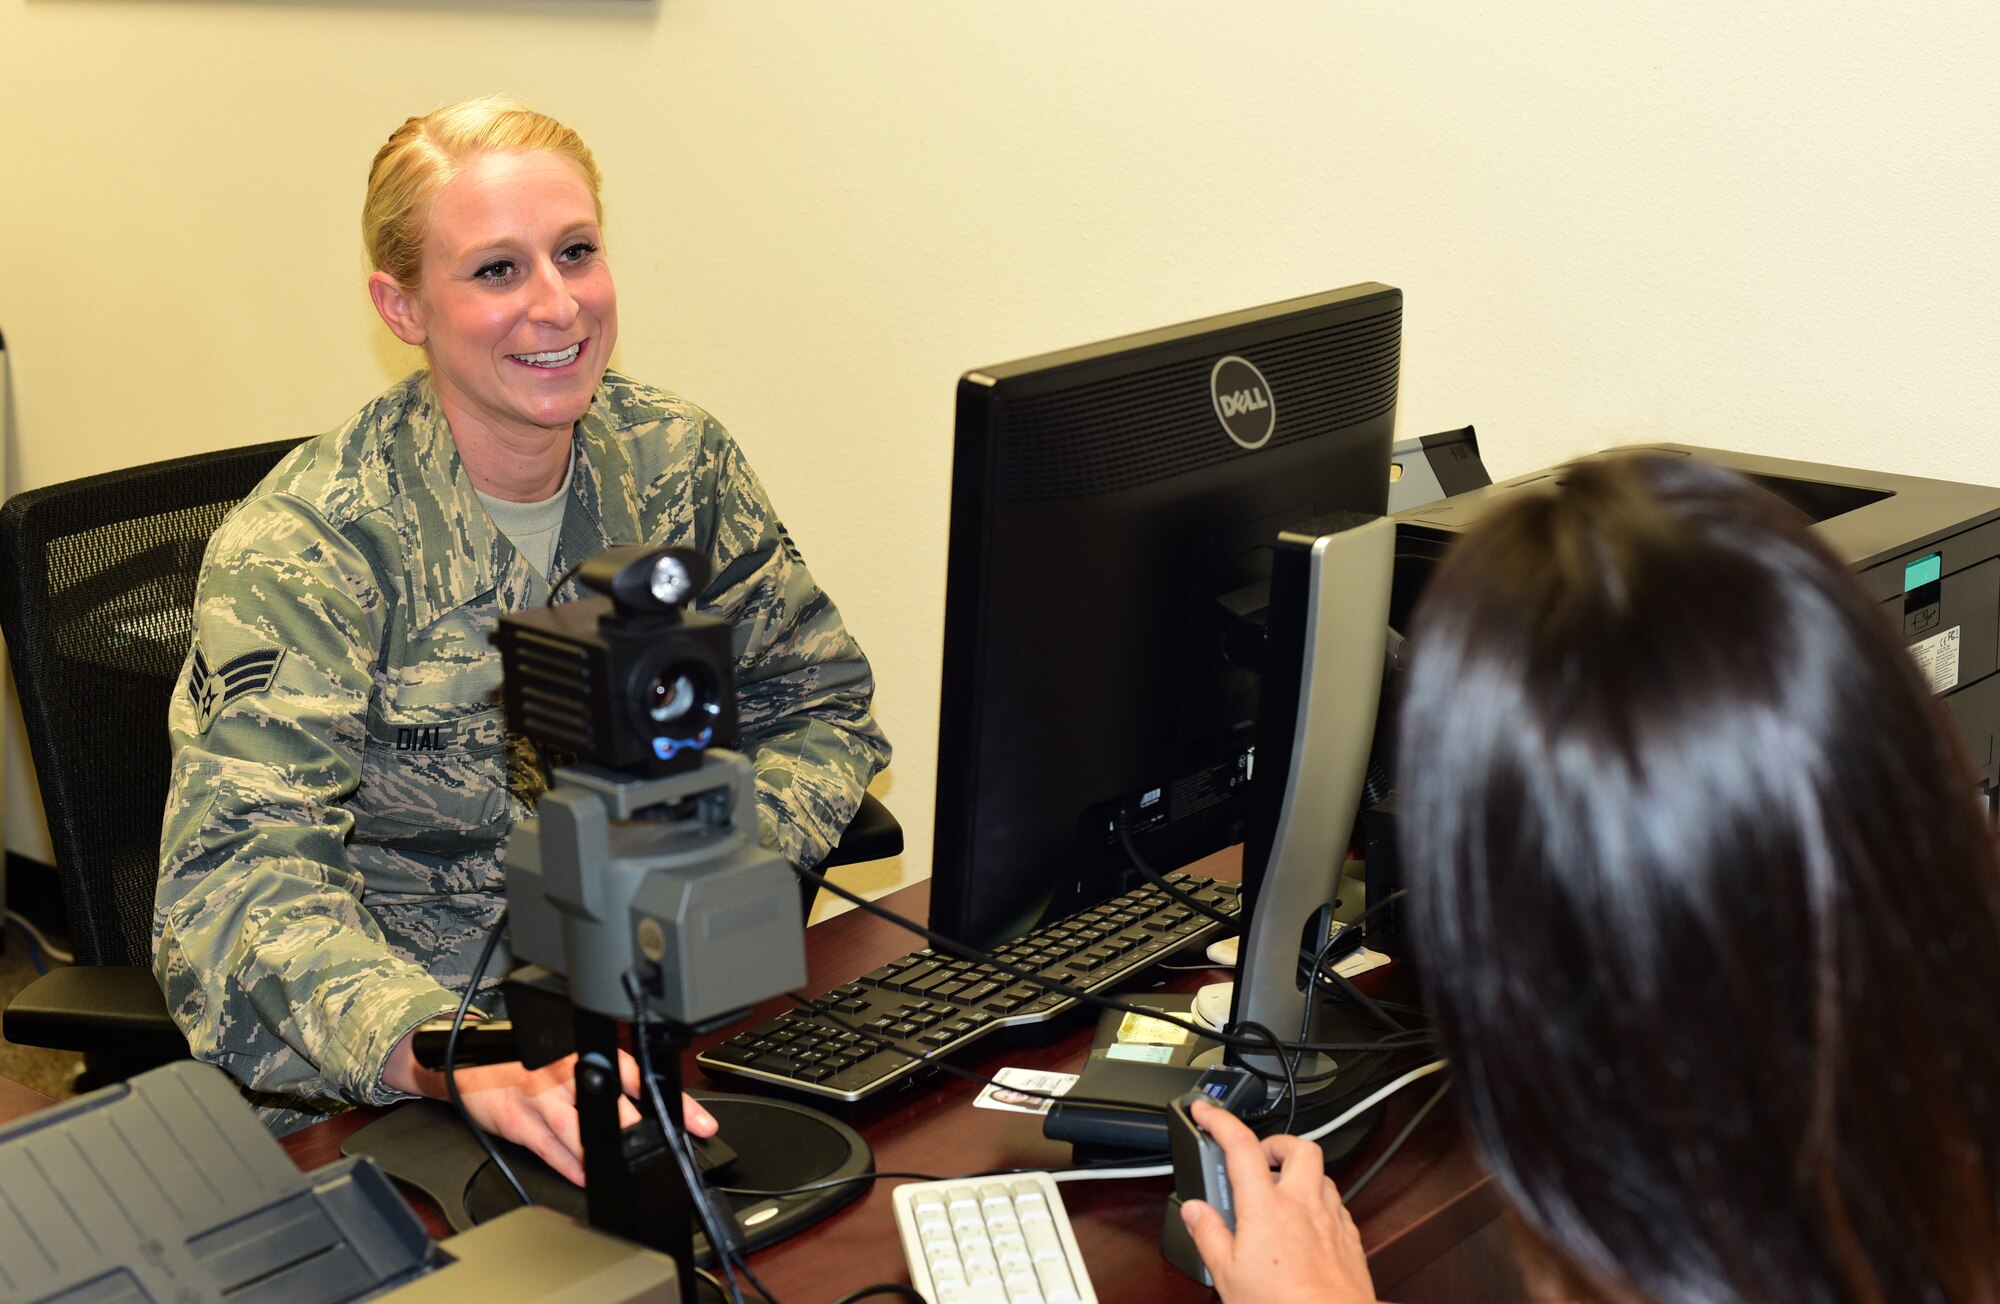 U.S. Air Force Senior Airman June Dial, 44th Fighter Group personnel specialist, assists a customer with making a new common access card, August 14, 2018, at Tyndall Air Force Base, Florida. As part of the 44th FG, Dial is part of a larger mission of training and projecting unrivaled 5th-generation combat airpower through mission ready Citizen Airmen. Though traditionally a reservist, she and her fellow 44th FG Airmen work side-by-side with active-duty Airmen to provide world class support of missions and increase the Air Force’s readiness. (U.S. Air Force photo by Senior Airman Cody R. Miller)